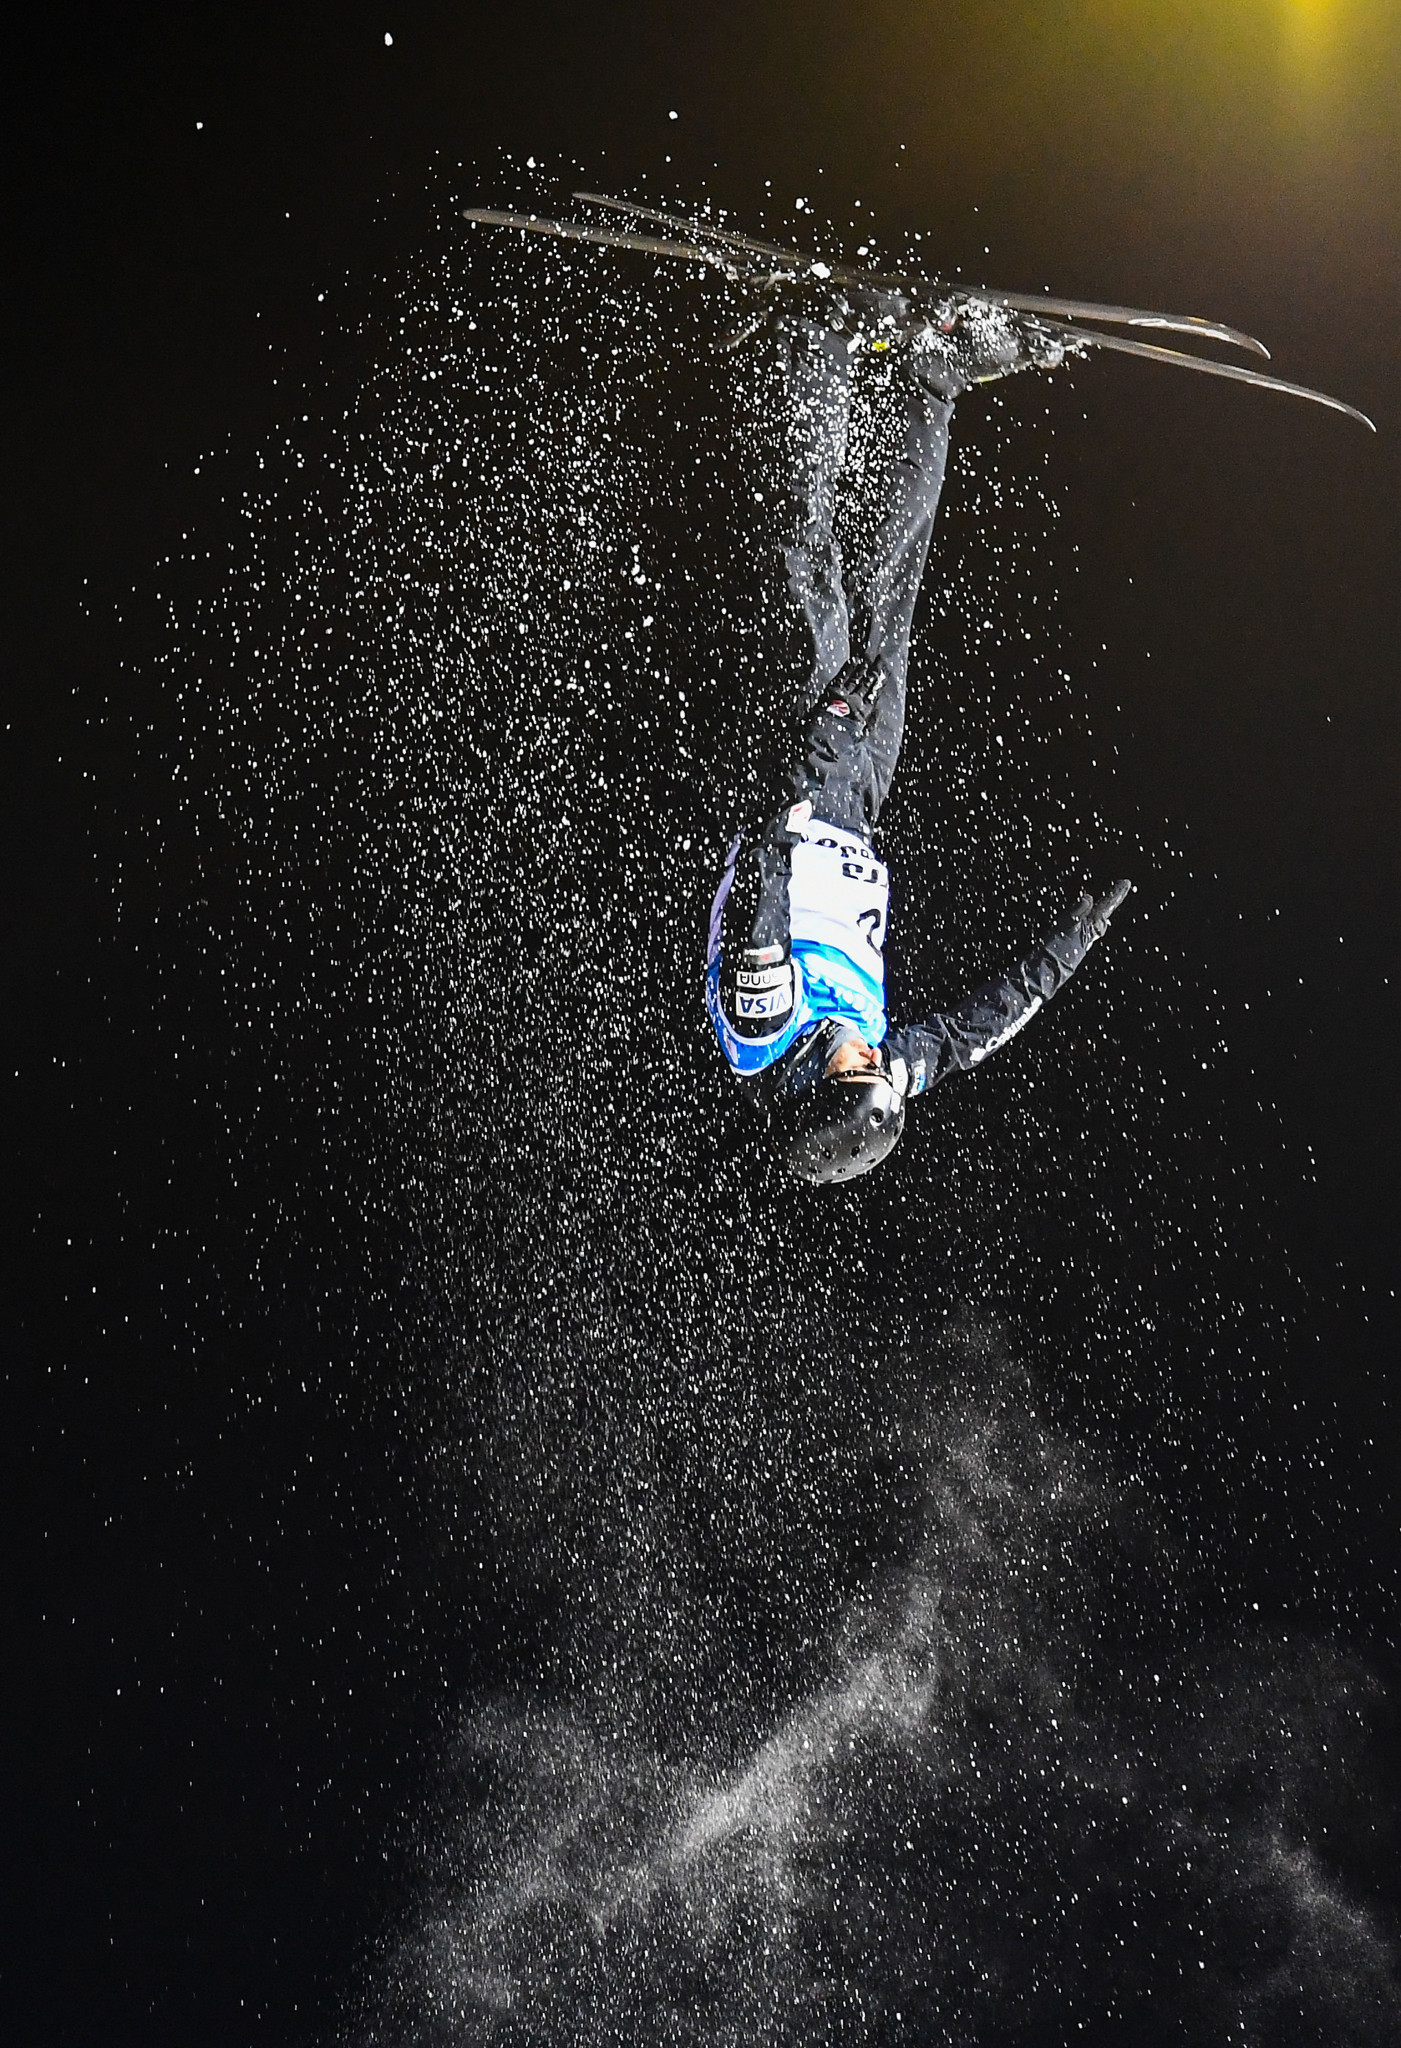 Michael's brother Jon Lillis won the aerials world title this year ©Getty Images